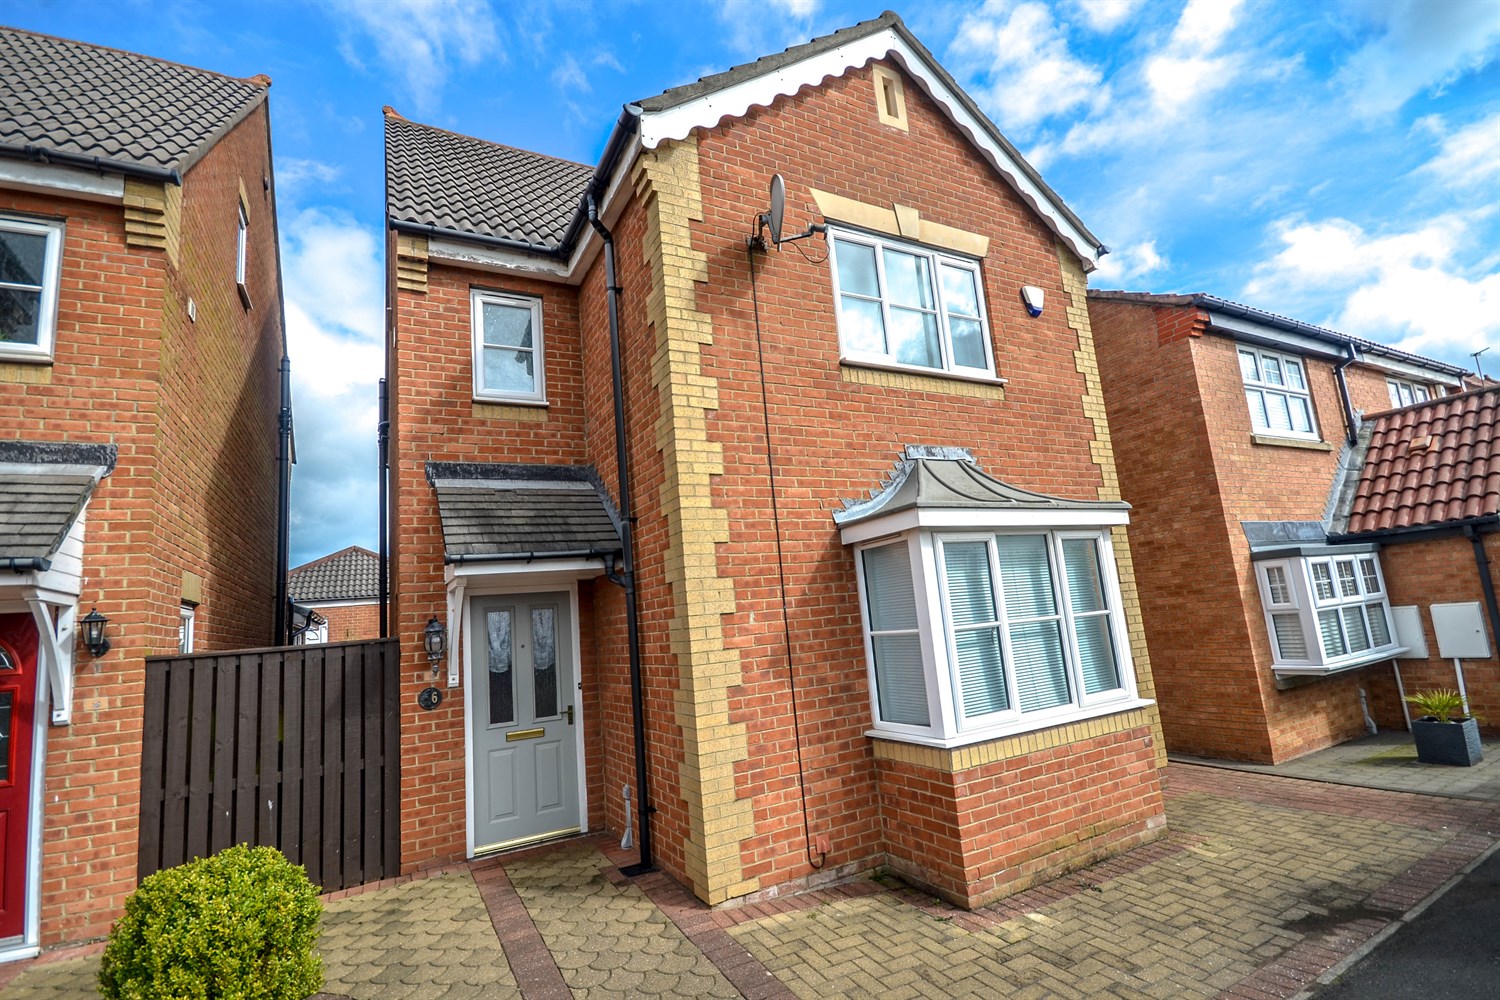 4 bed detached house for sale in Callum Drive, South Shields - Property Image 1